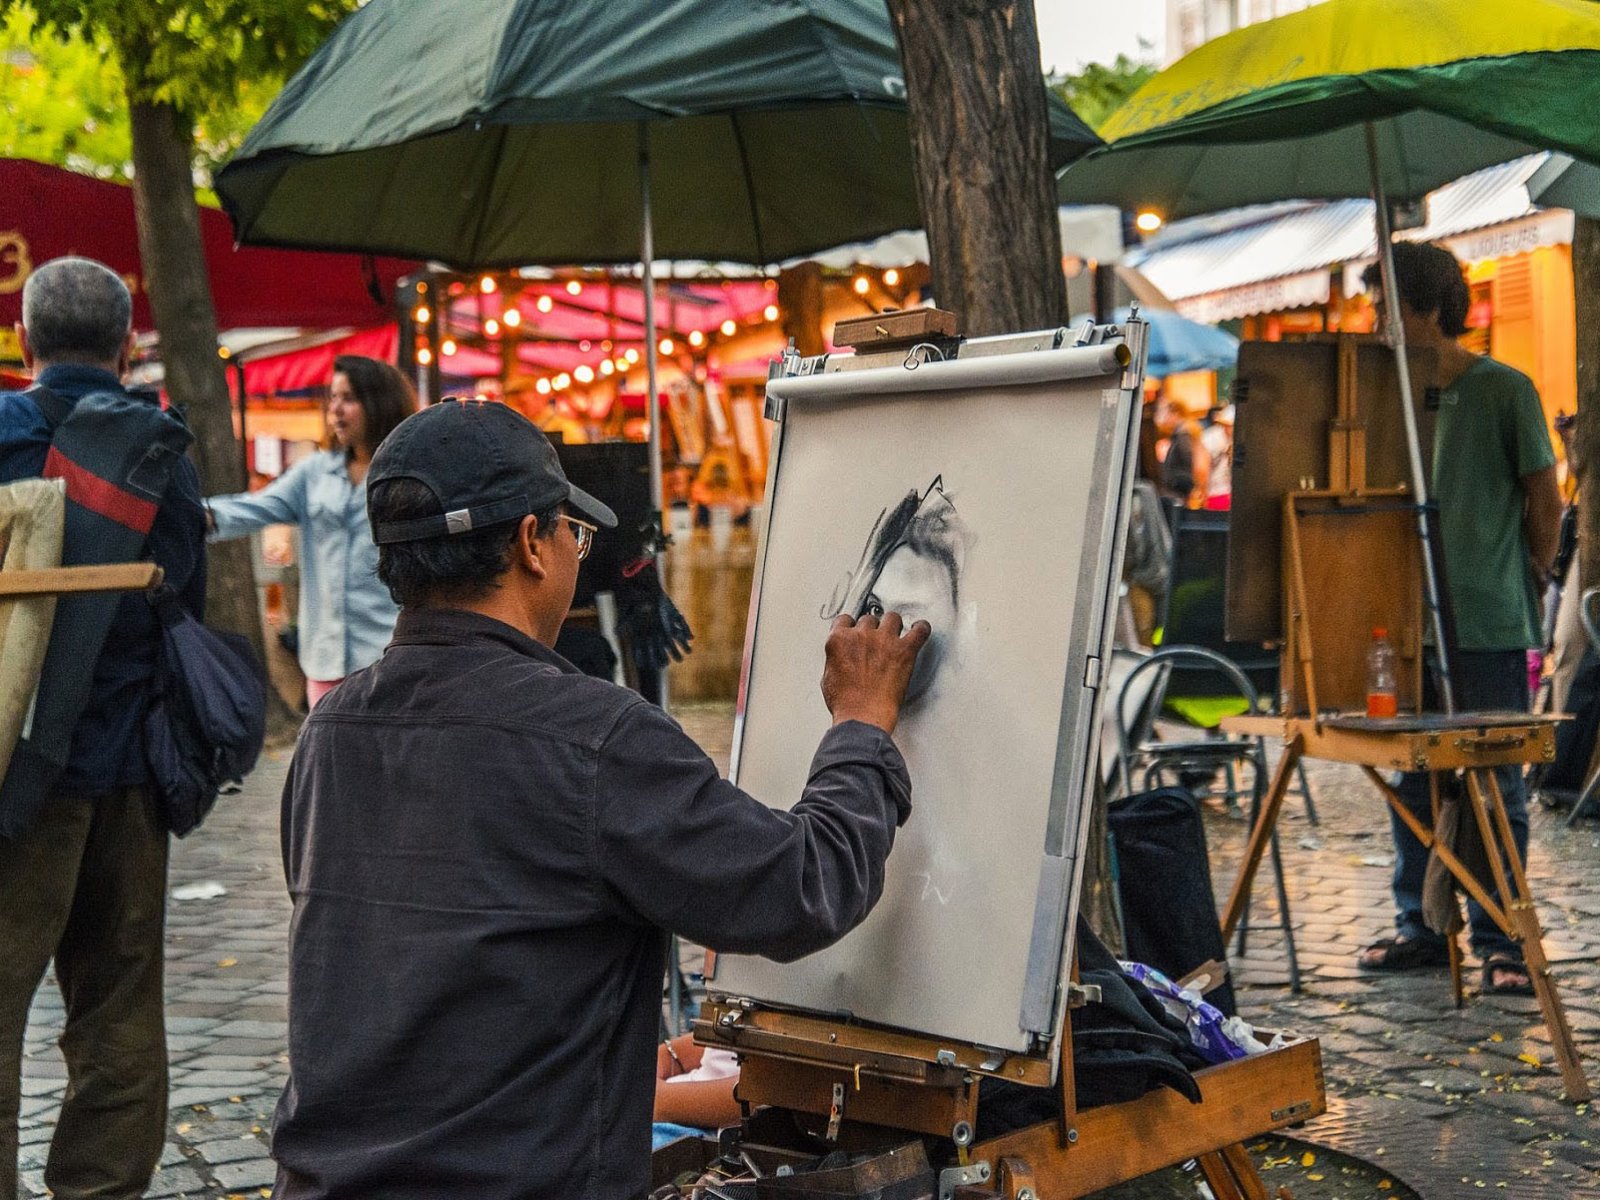 How to buy a painting on Tertre Square in Paris